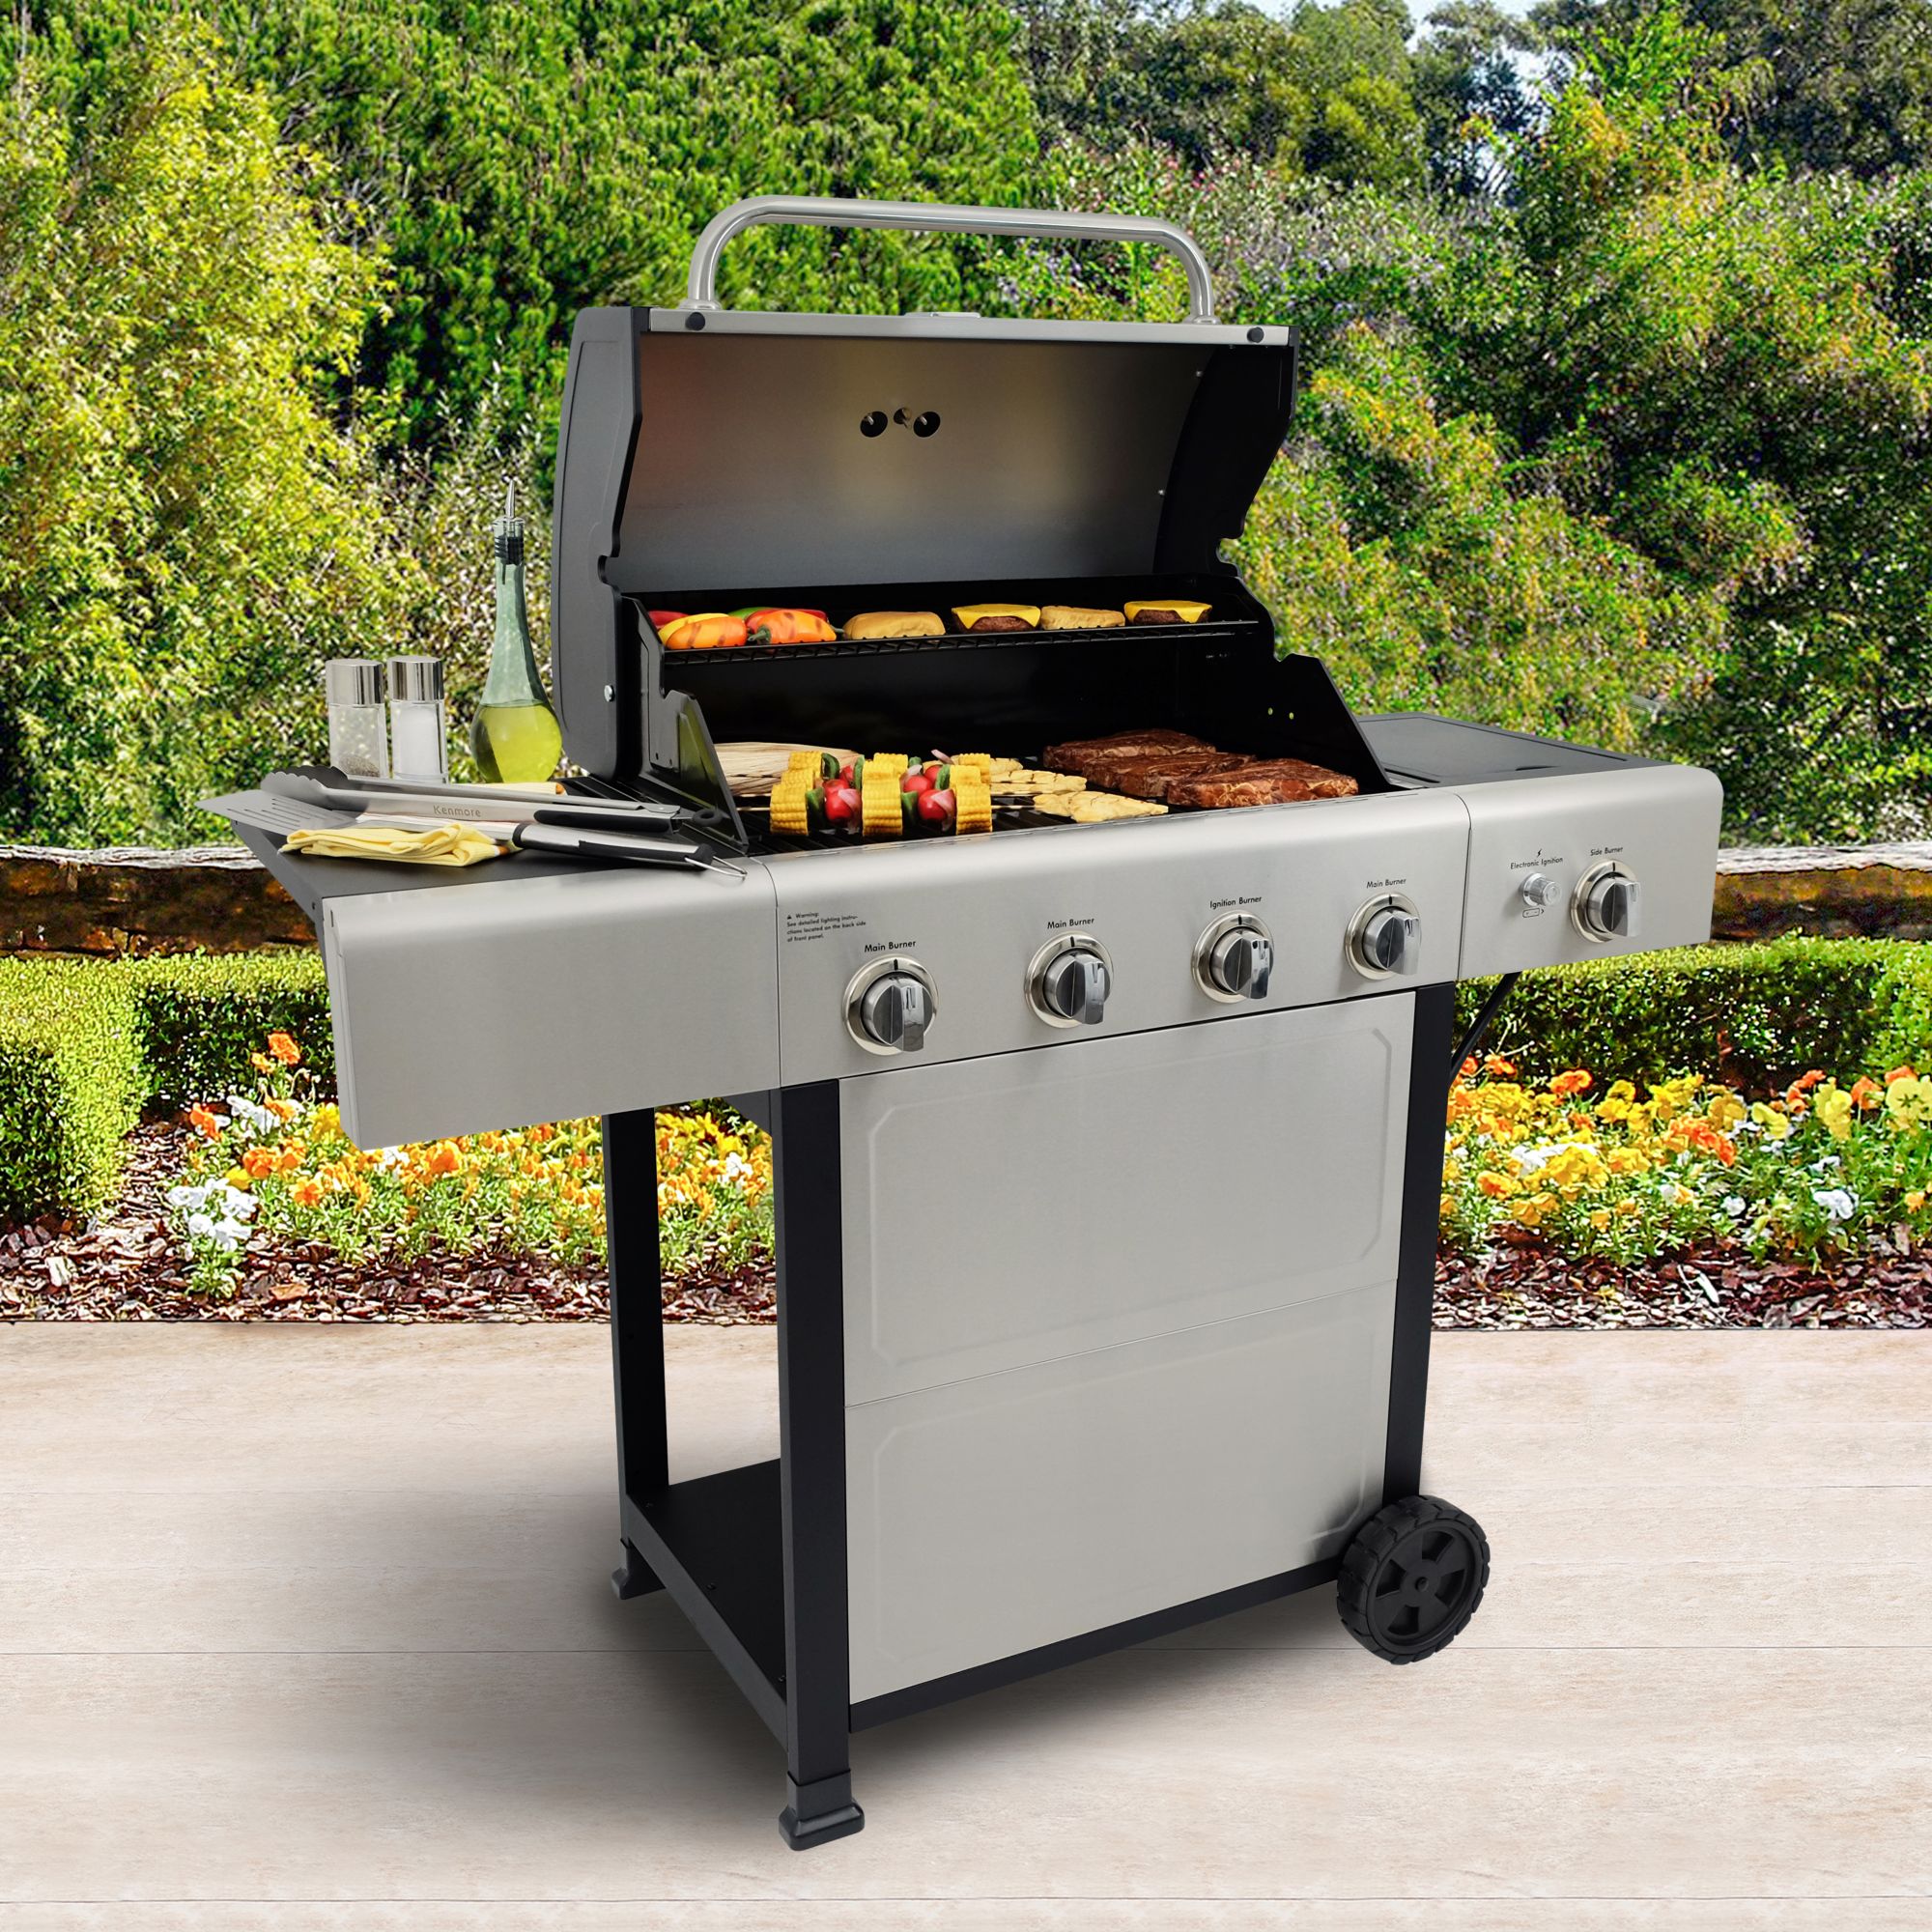 Kenmore 4-Burner Gas Grill with Side Burner Grill and Stainless Steel Lid